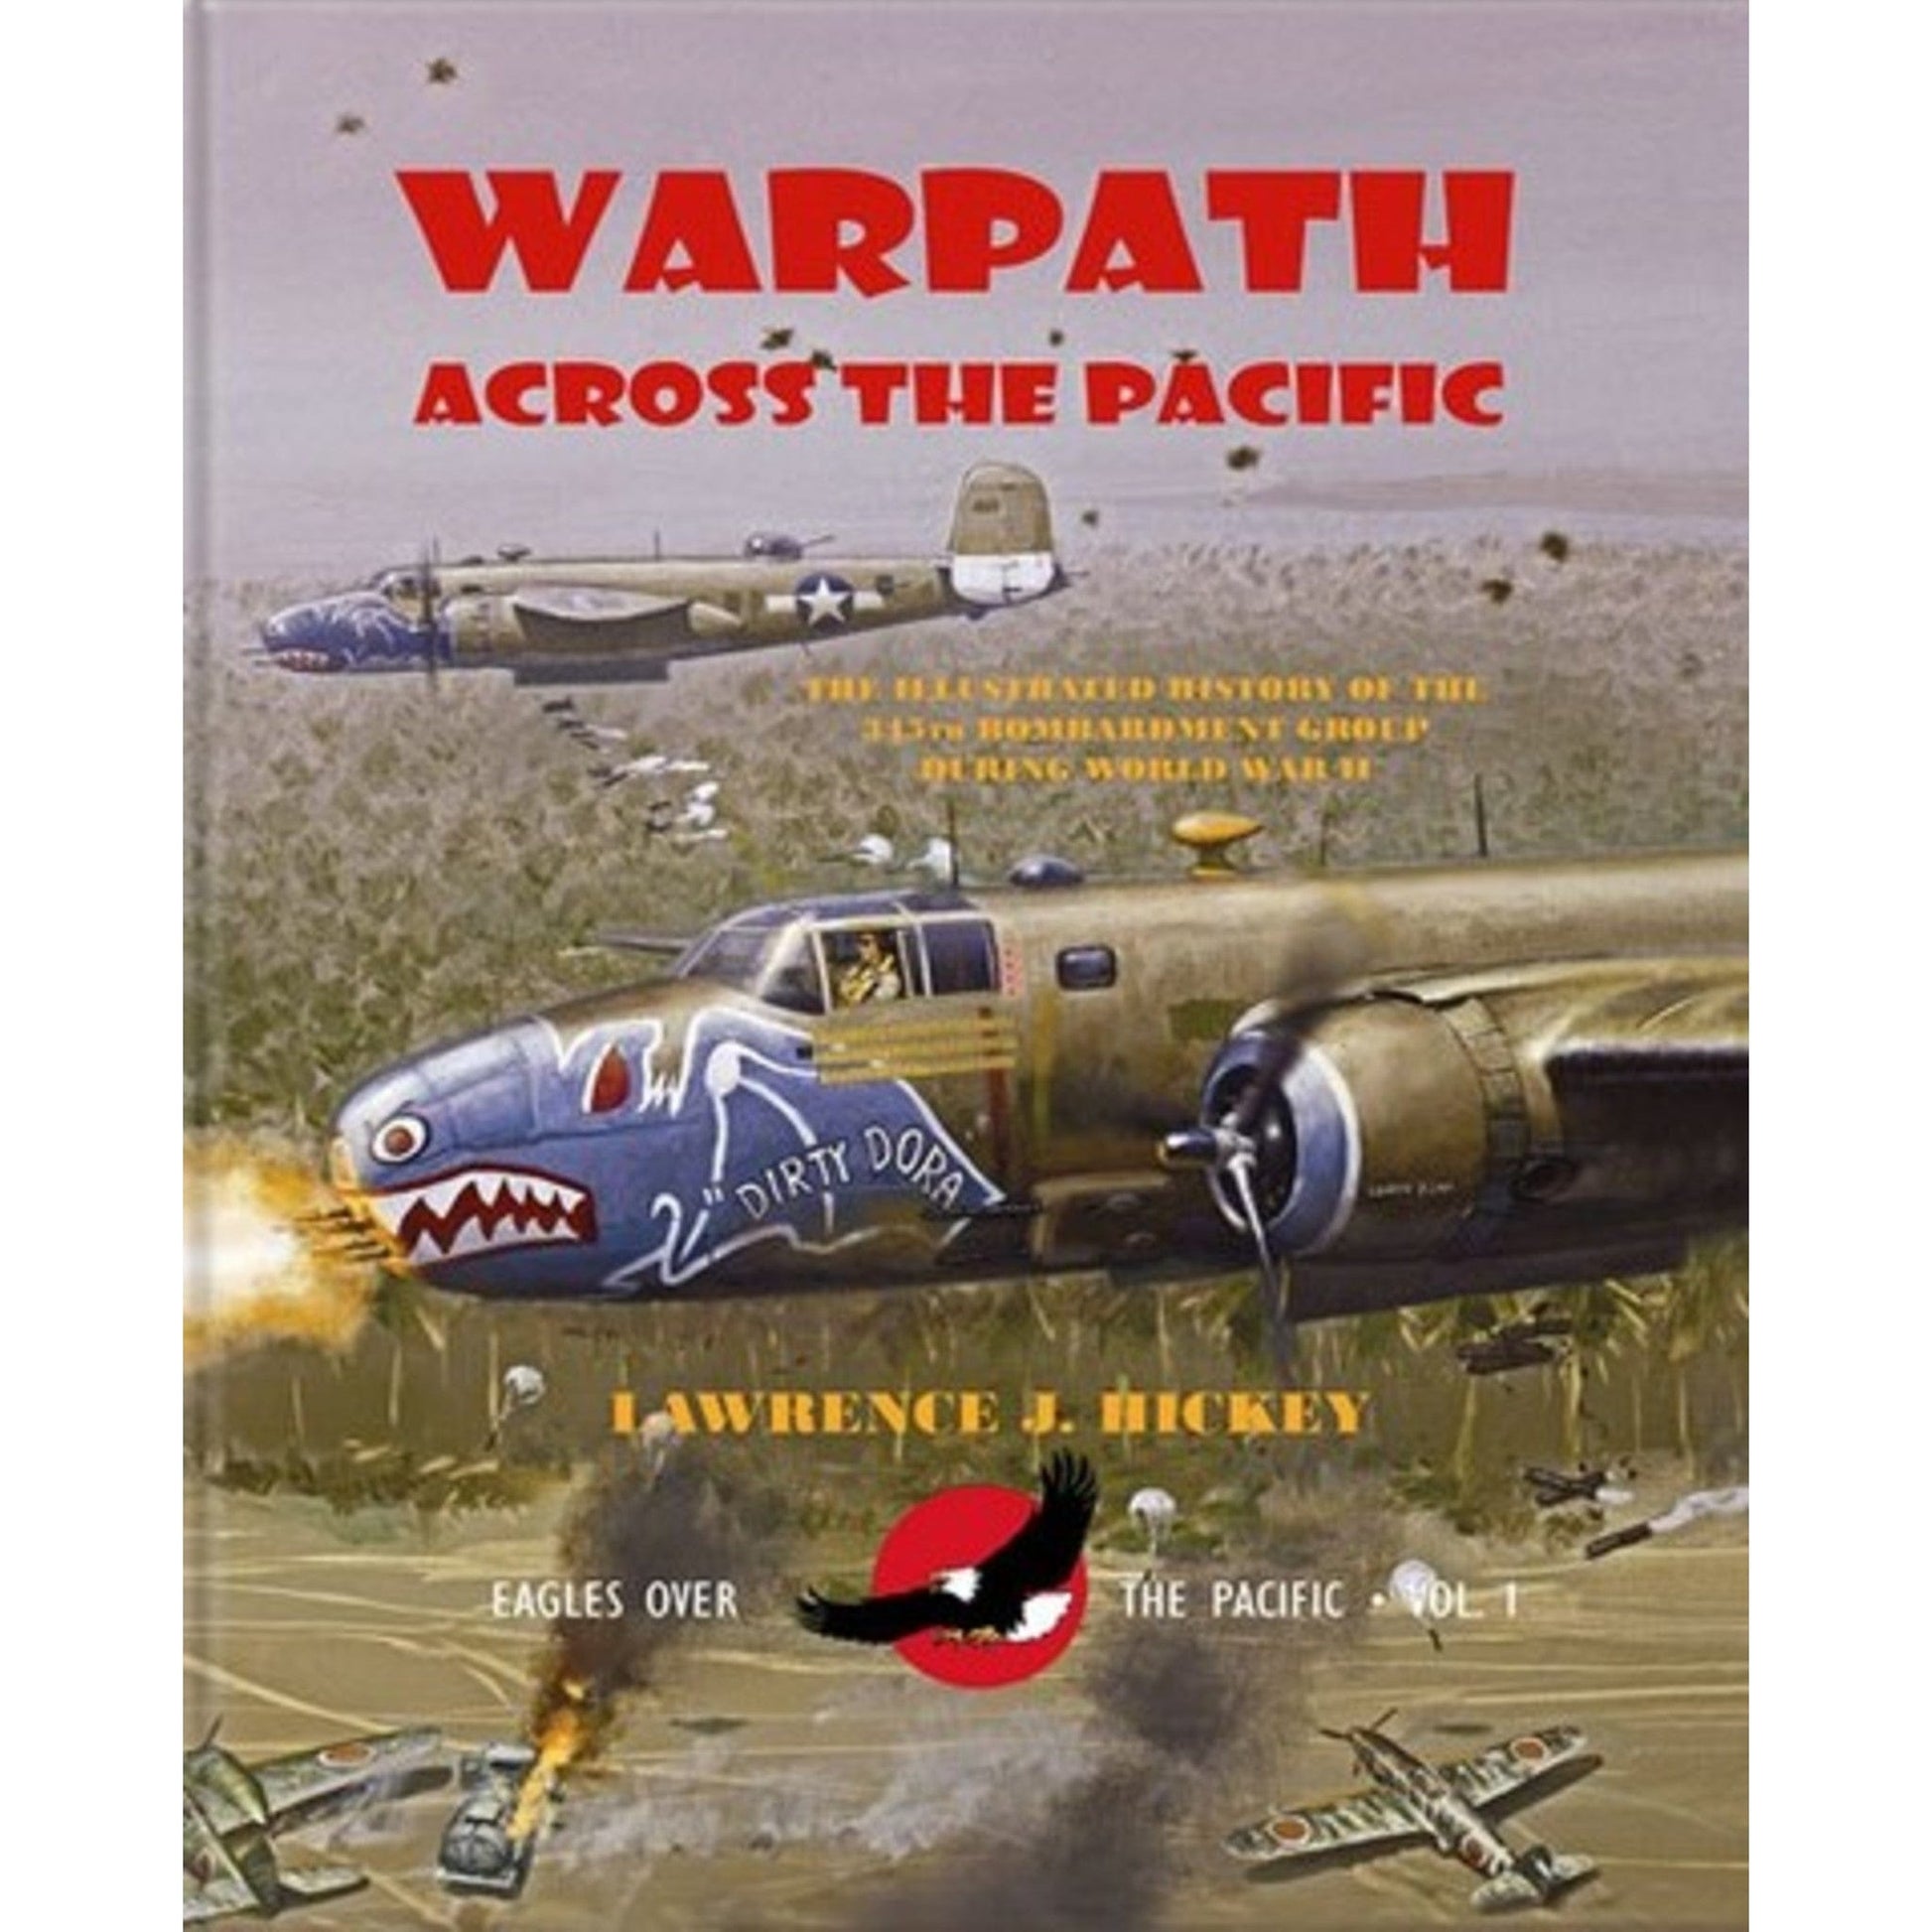 "Warpath Across the Pacific" - by author Lawrence J. Hickey from The History List Store